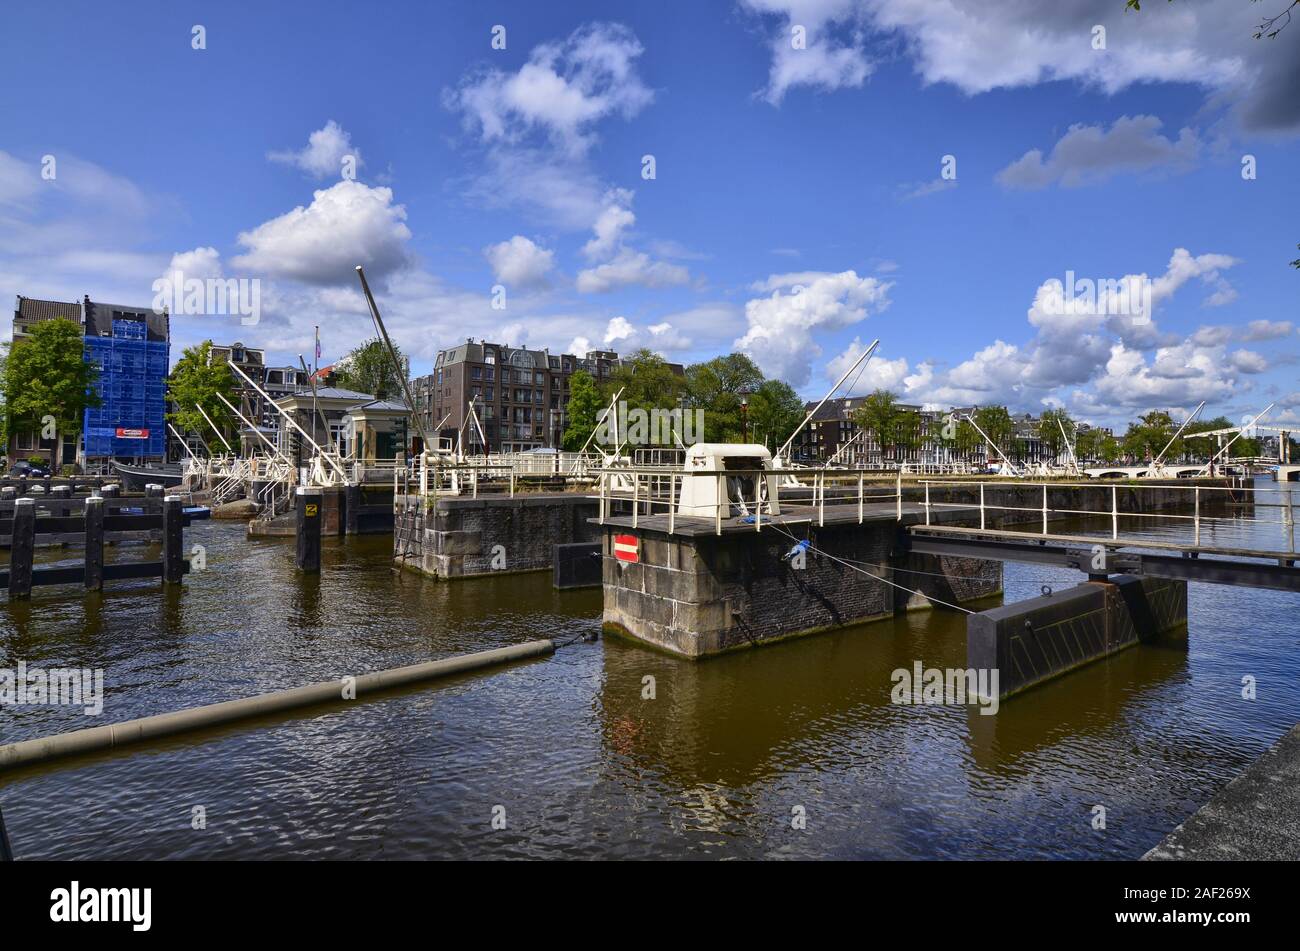 Amsterdam, Holland, August 2019. The dam on the Amstel river. Metal parts painted in white. Blue sky with white clouds. Stock Photo